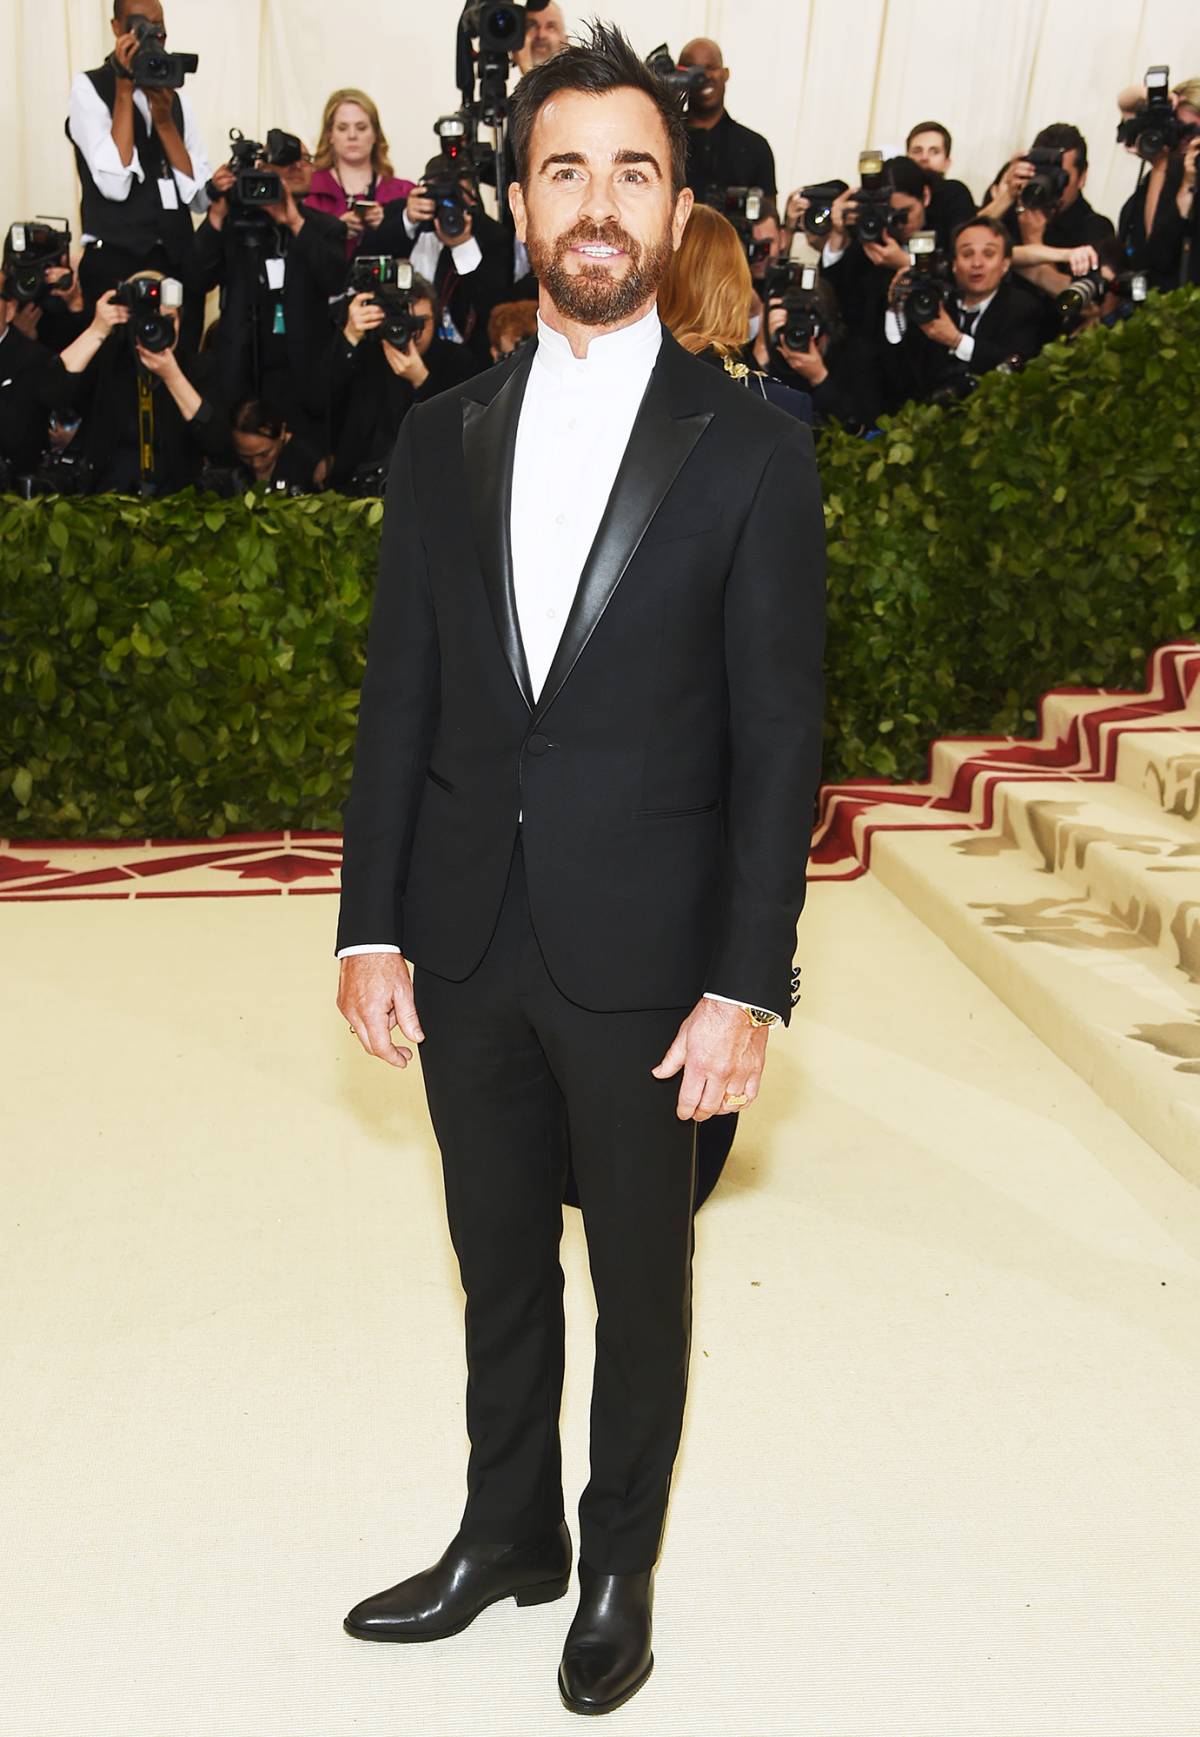 Met Gala Gossip: Emma Stone, Justin Theroux, and More Celebs